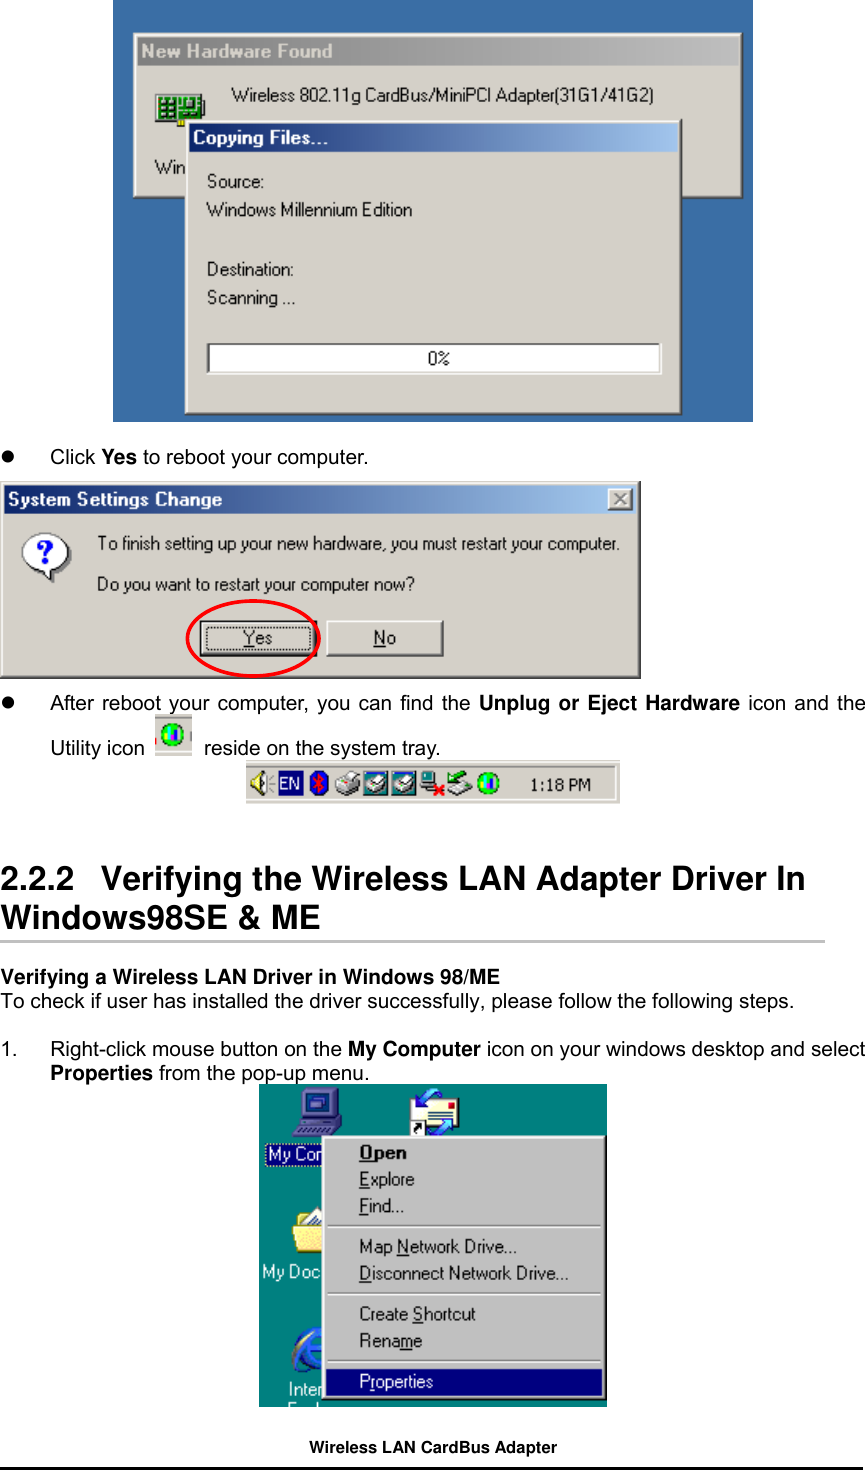     Click Yes to reboot your computer.    After reboot your computer, you can find the Unplug or Eject Hardware icon and the Utility icon   reside on the system tray.      2.2.2   Verifying the Wireless LAN Adapter Driver In Windows98SE &amp; ME    Verifying a Wireless LAN Driver in Windows 98/ME         To check if user has installed the driver successfully, please follow the following steps.  1.  Right-click mouse button on the My Computer icon on your windows desktop and select Properties from the pop-up menu.   Wireless LAN CardBus Adapter 